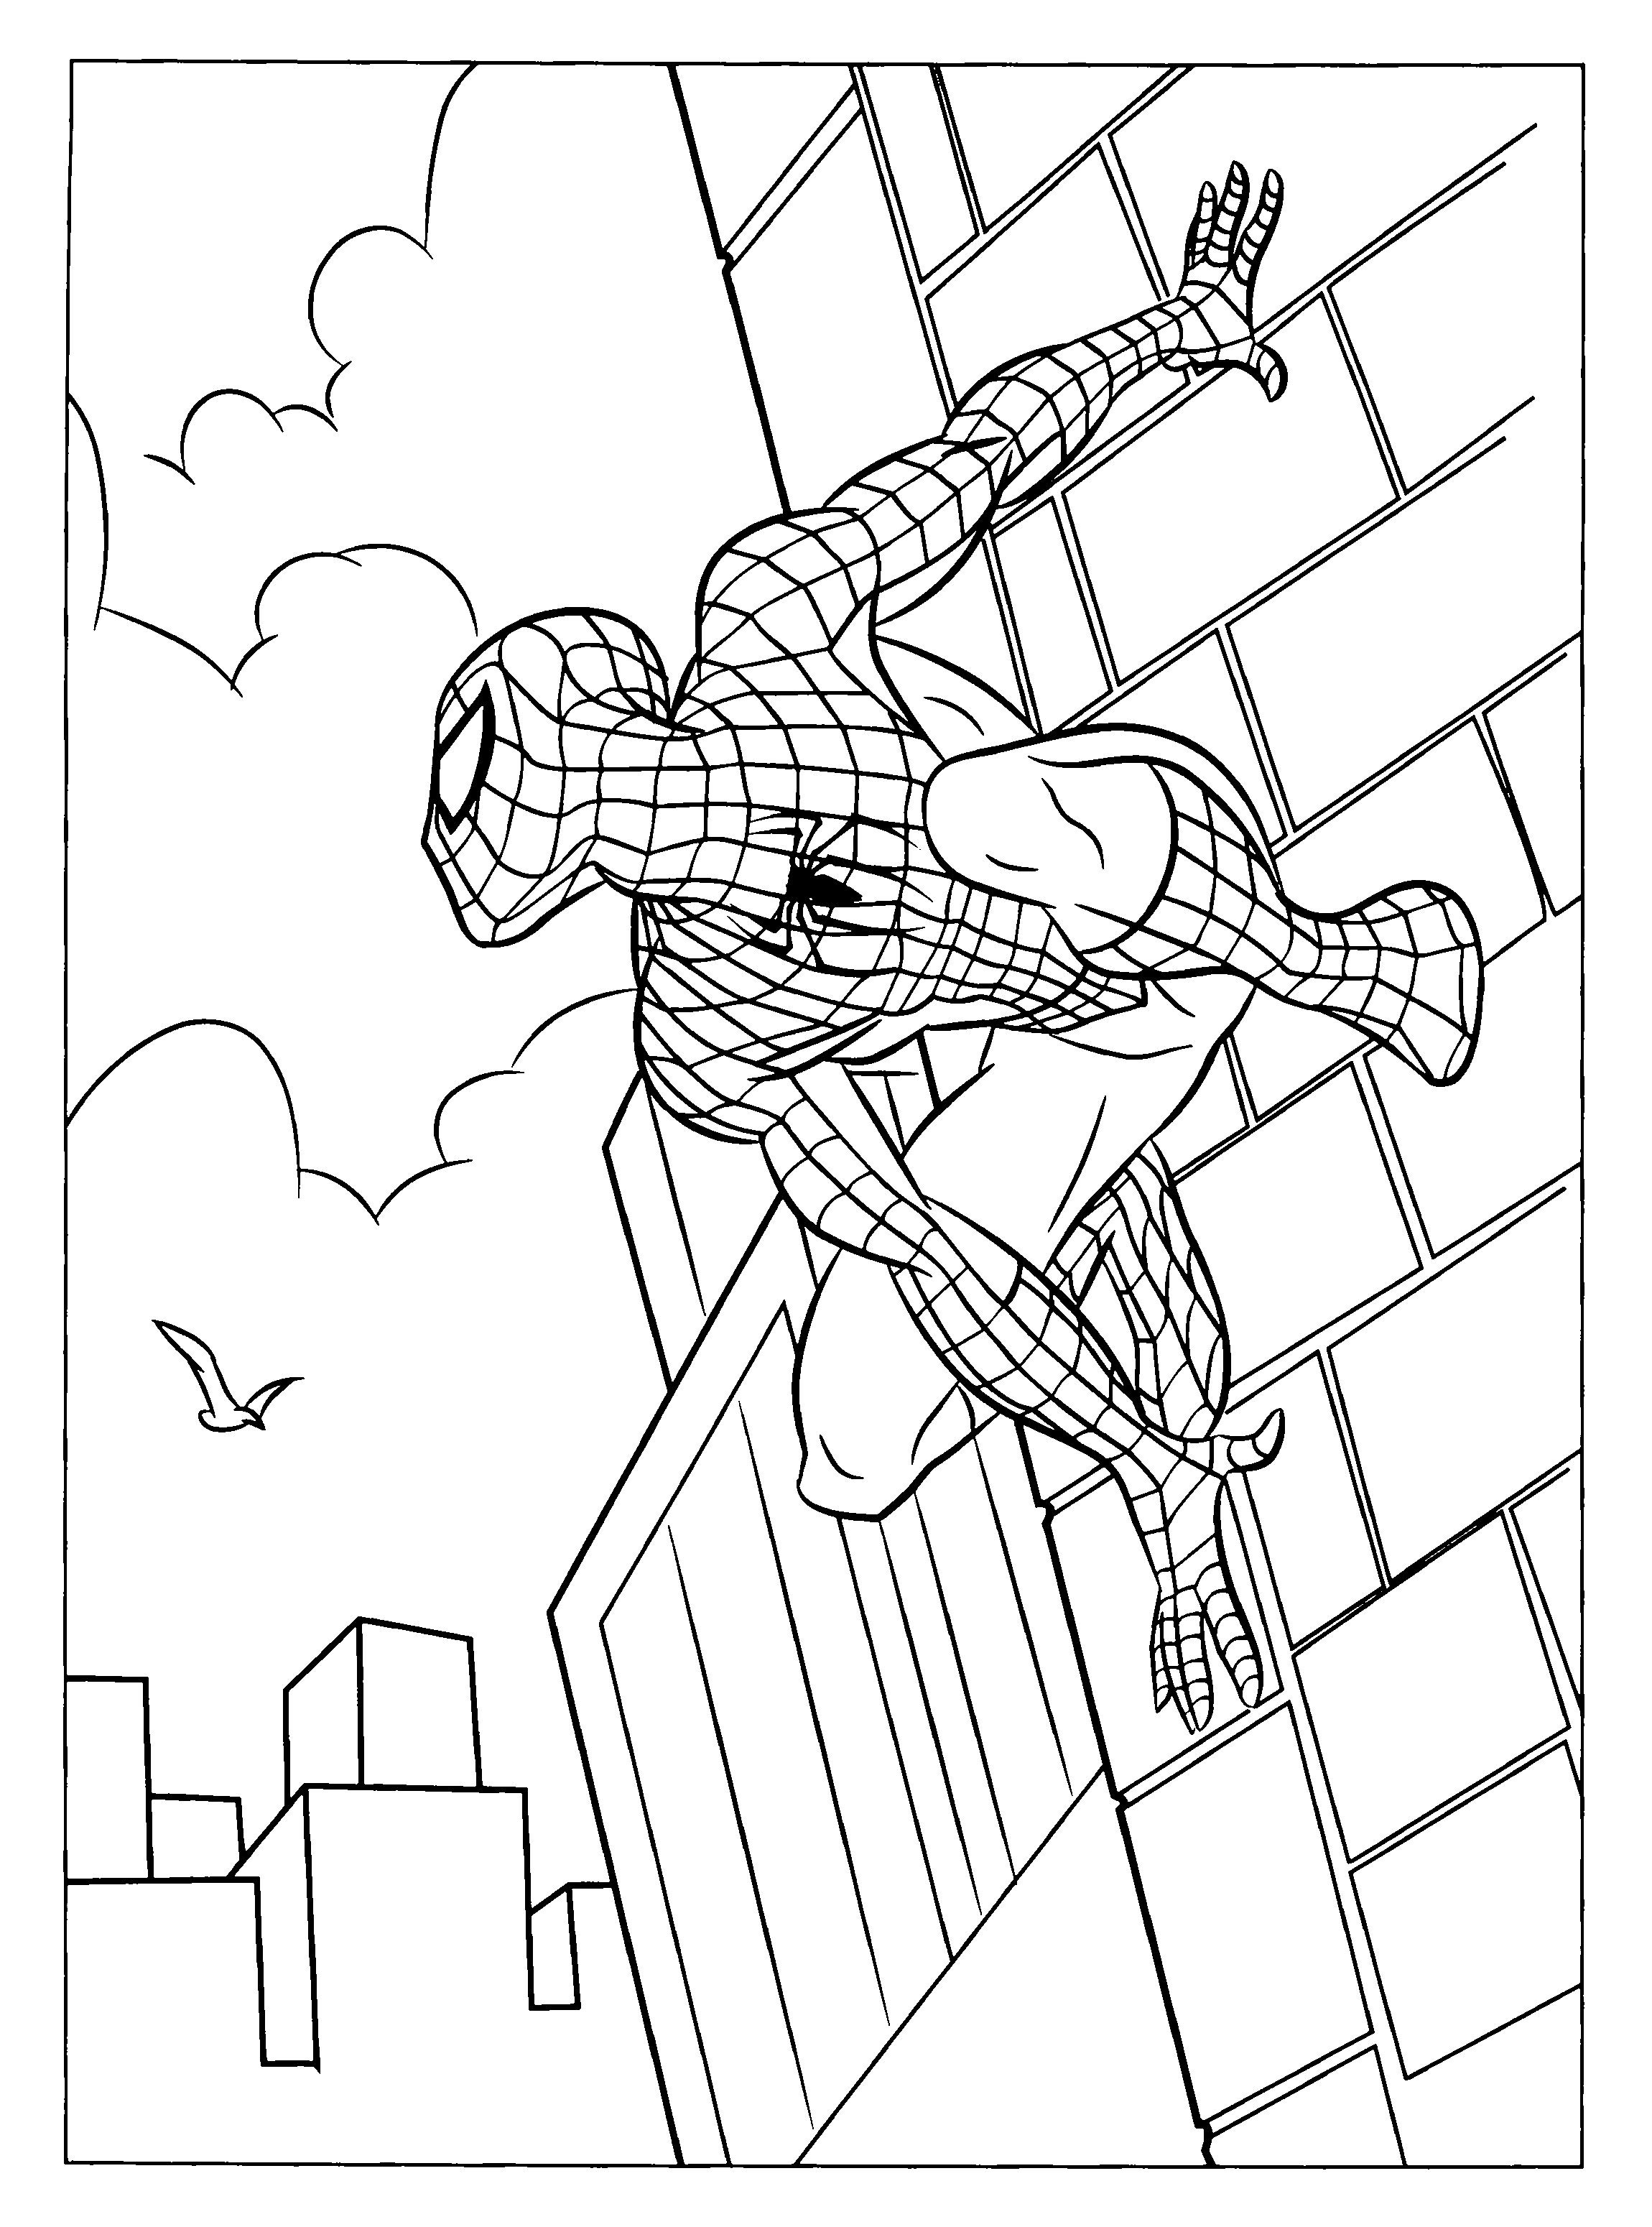 Spiderman Coloring pages | Kids coloring pages | Free coloring pages | #30